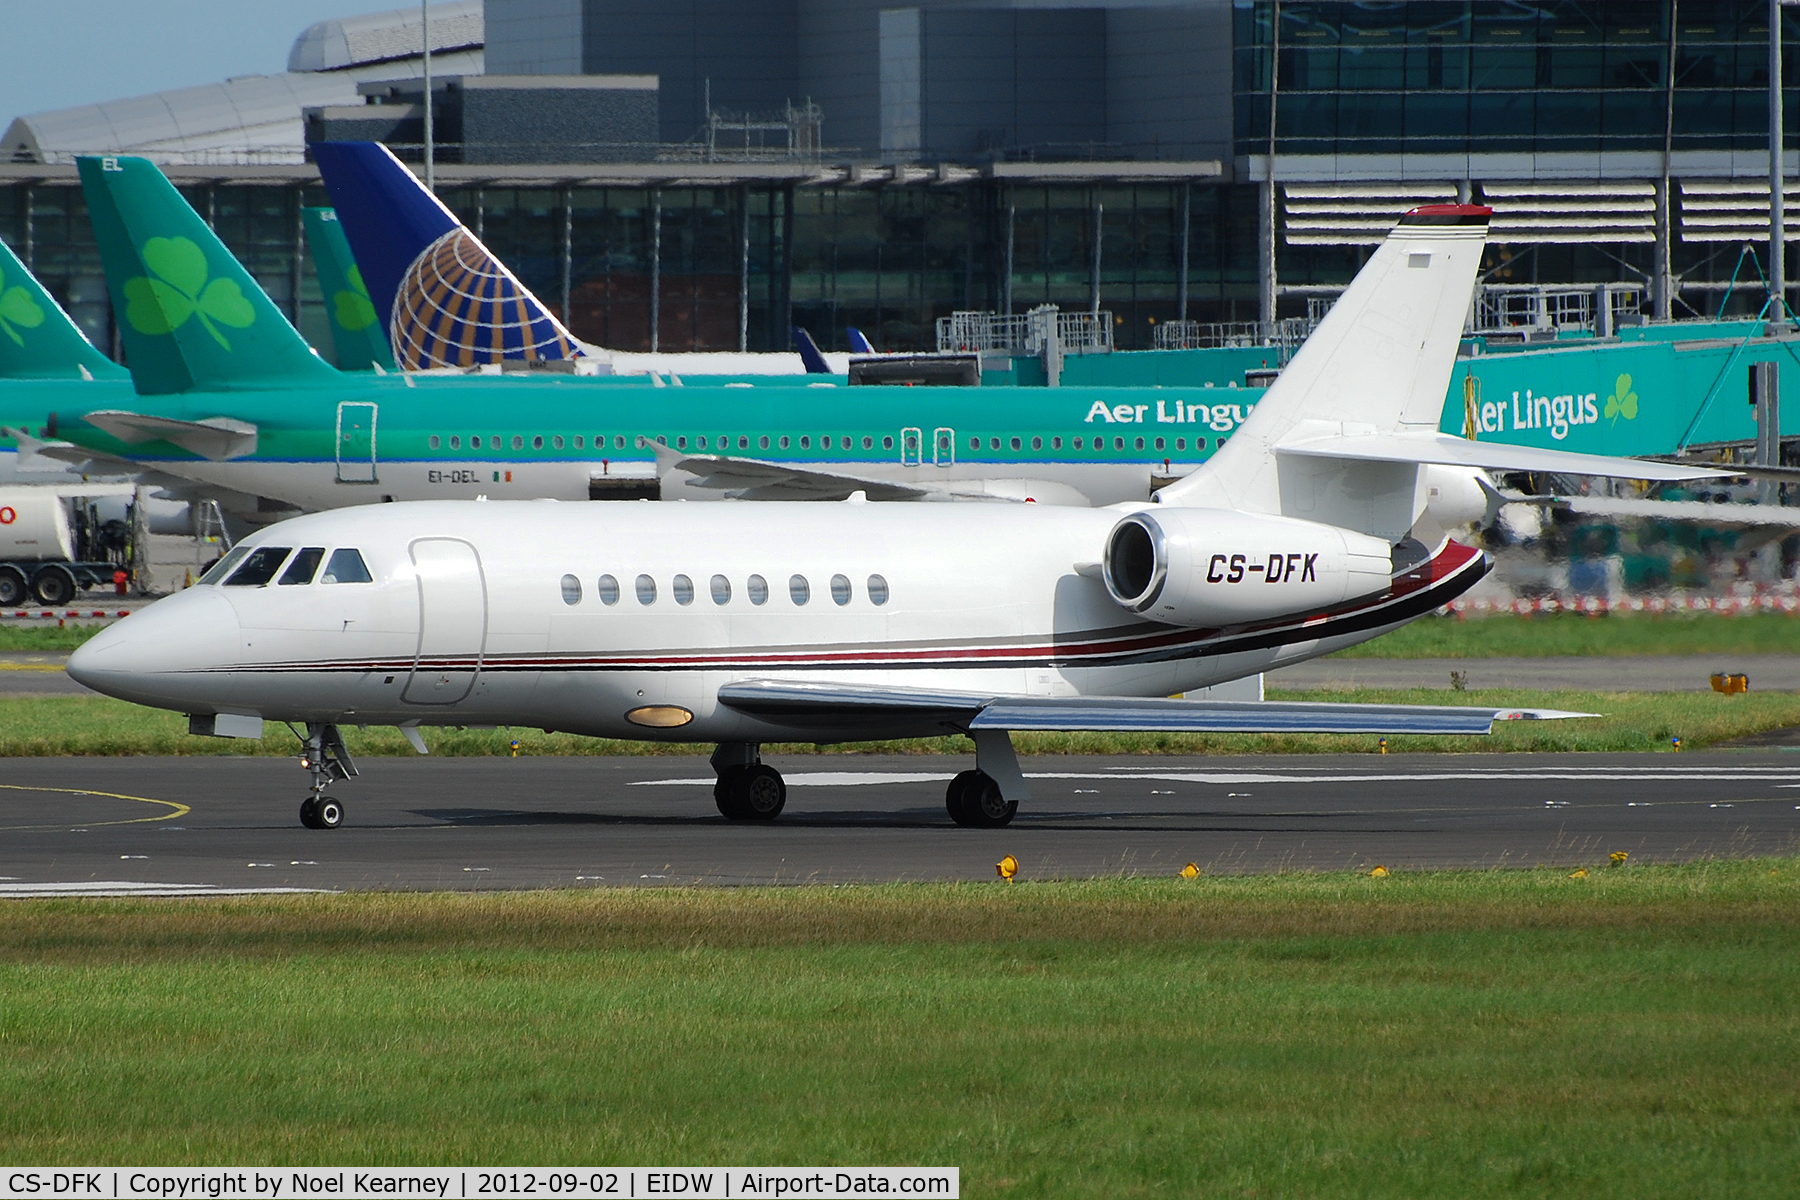 CS-DFK, 2006 Dassault Falcon 2000EX C/N 65, Lined up for departure off Rwy 28 at EIDW.